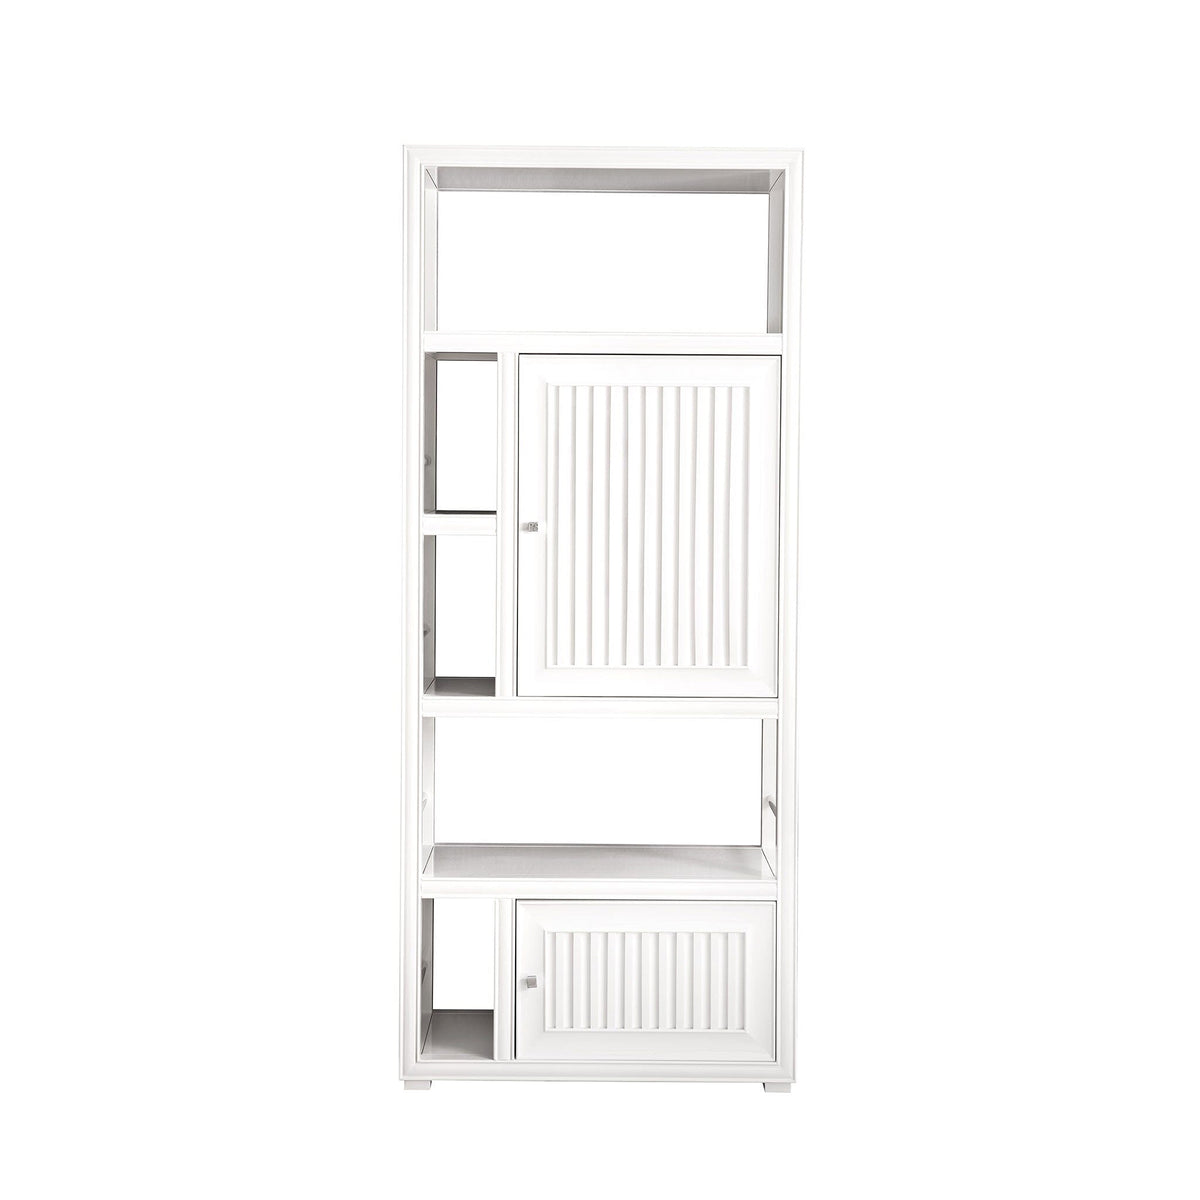 30" Athens Bookcase Linen Cabinet, Glossy White